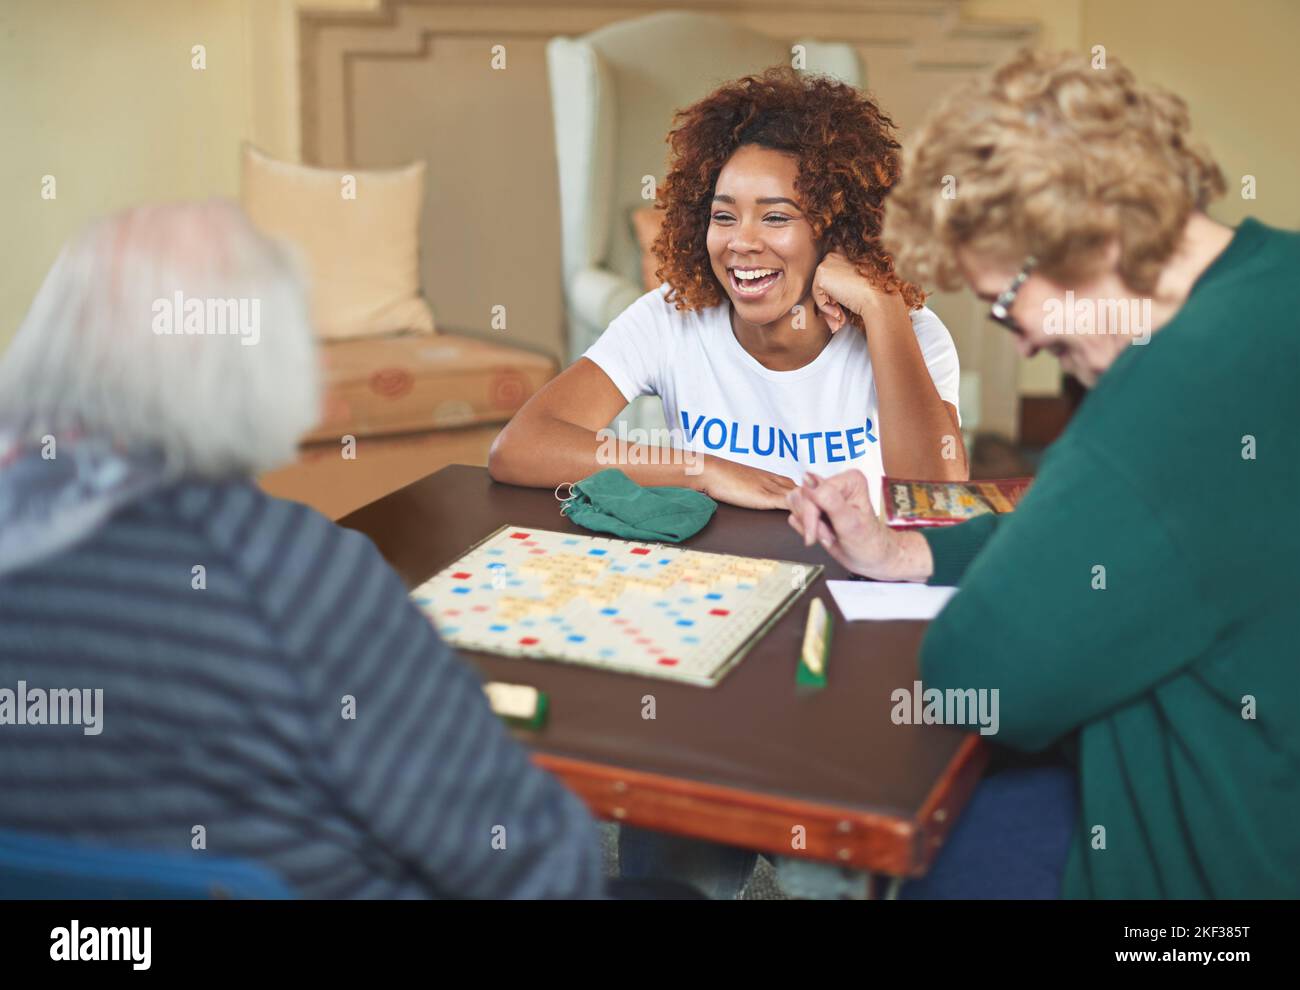 She tries to make a difference every day. a volunteer working with seniors at a retirement home. Stock Photo